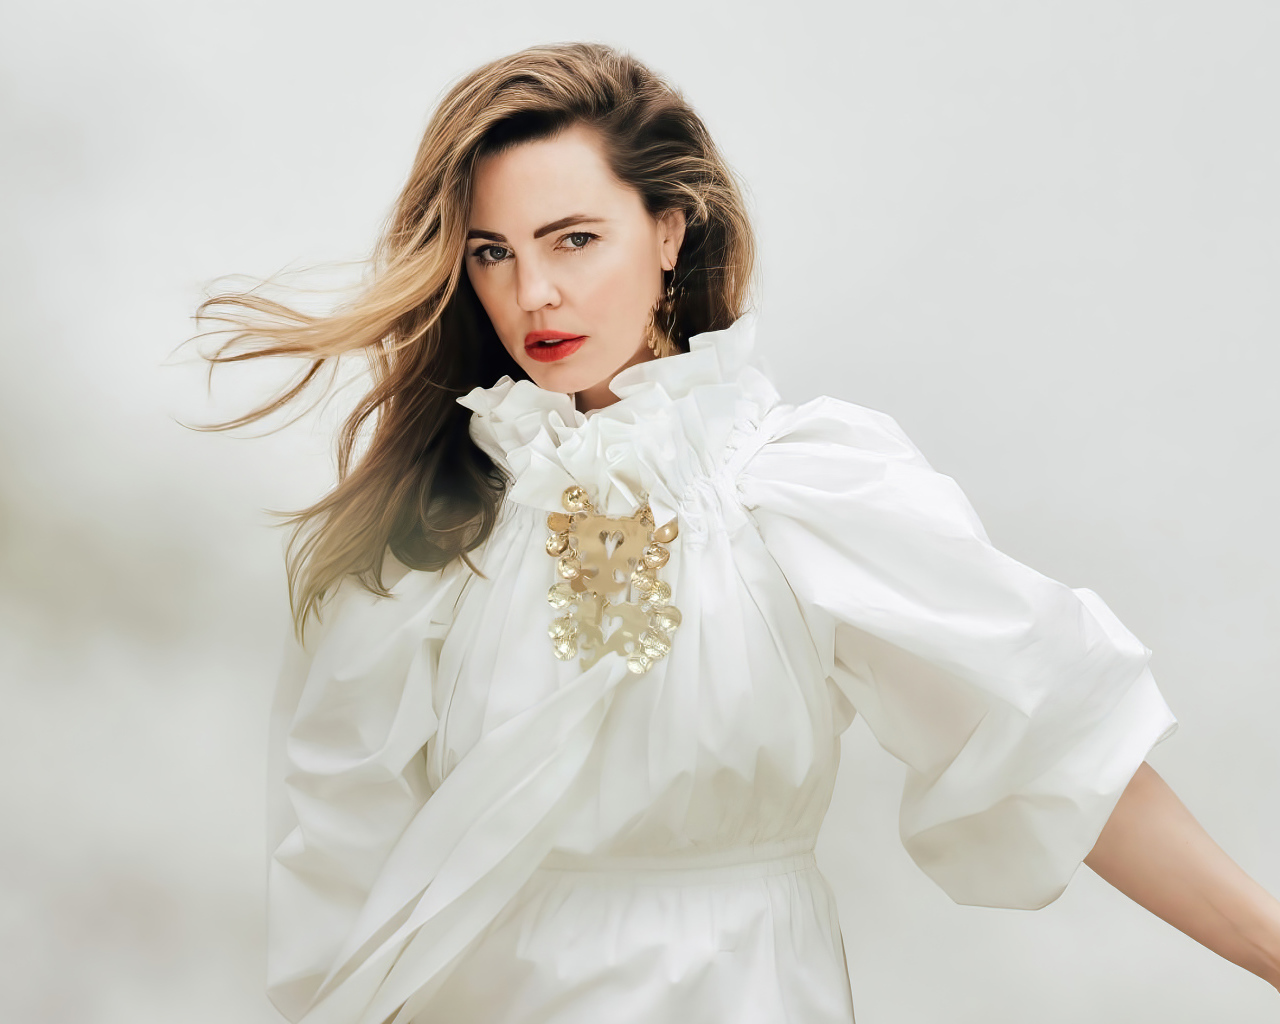 Actress Melissa George in a white dress